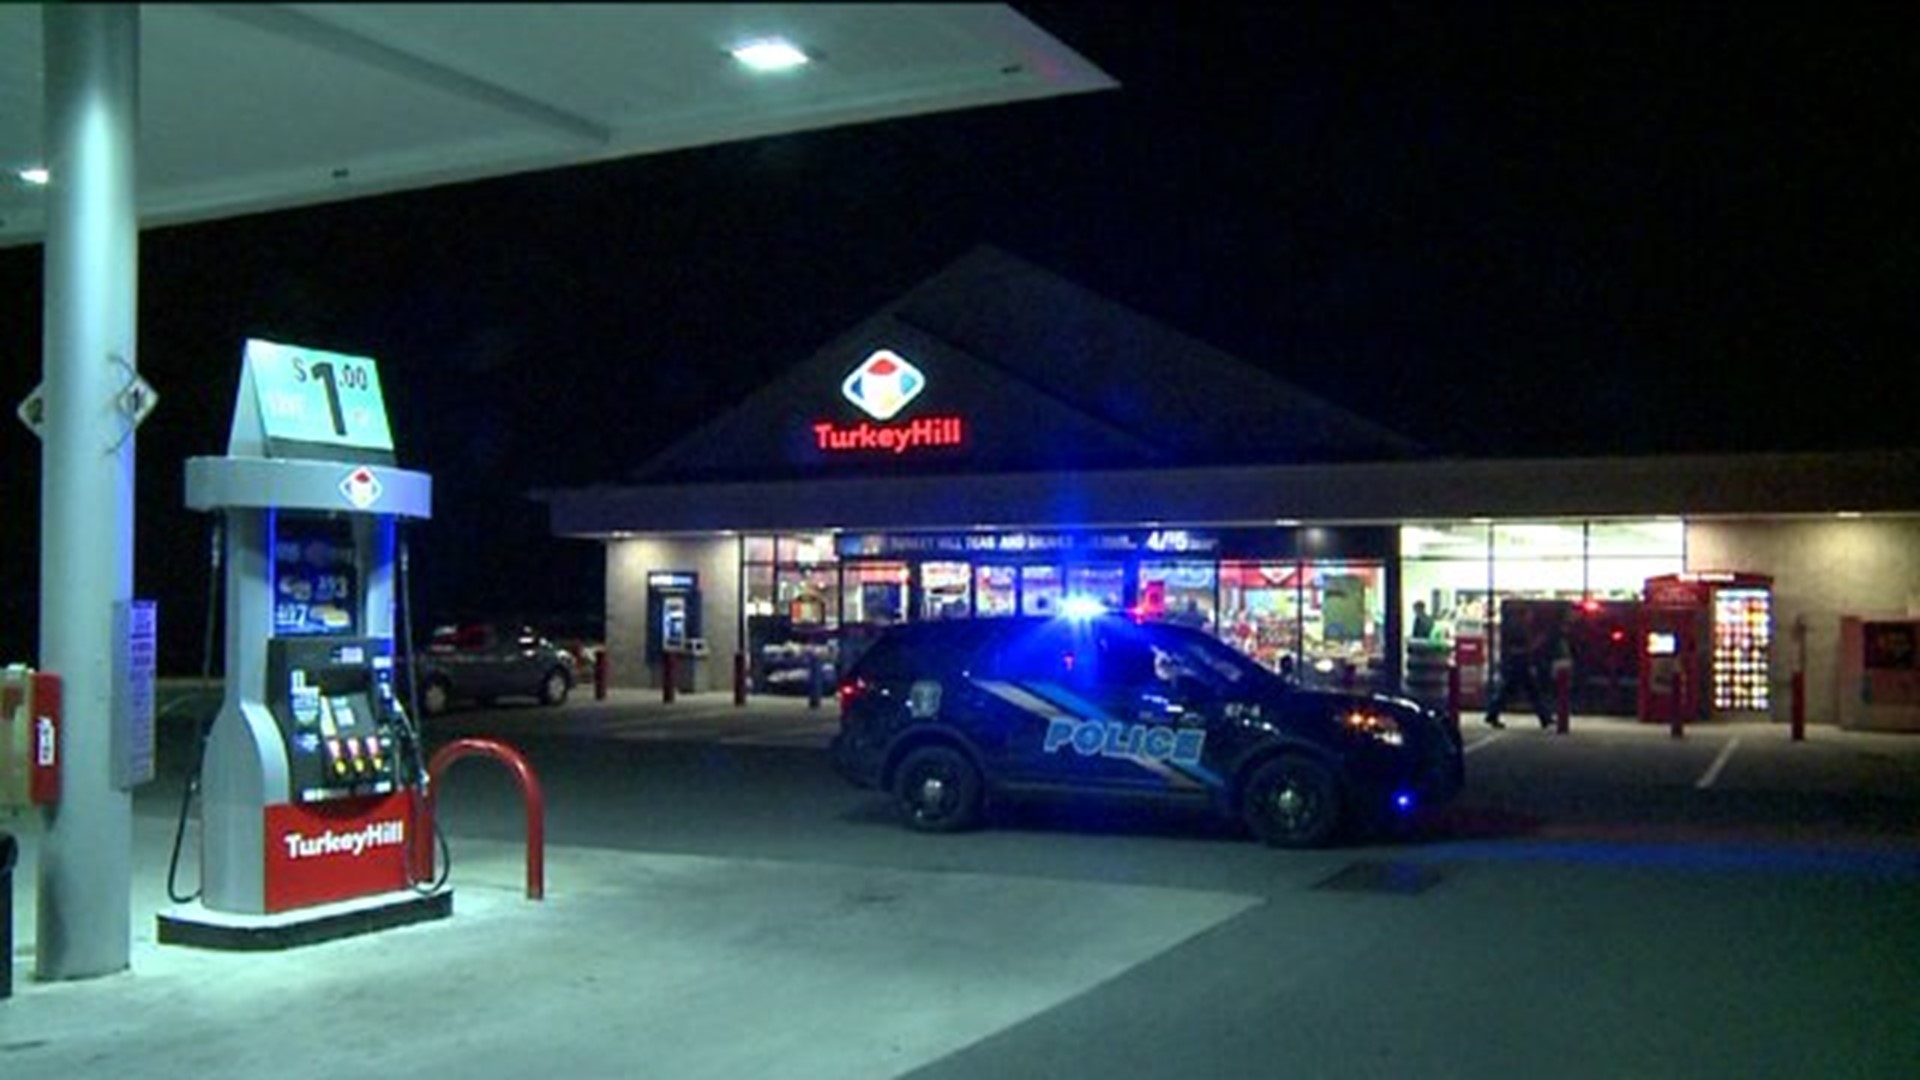 Armed Robbery at a Mini-Mart in Luzerne County